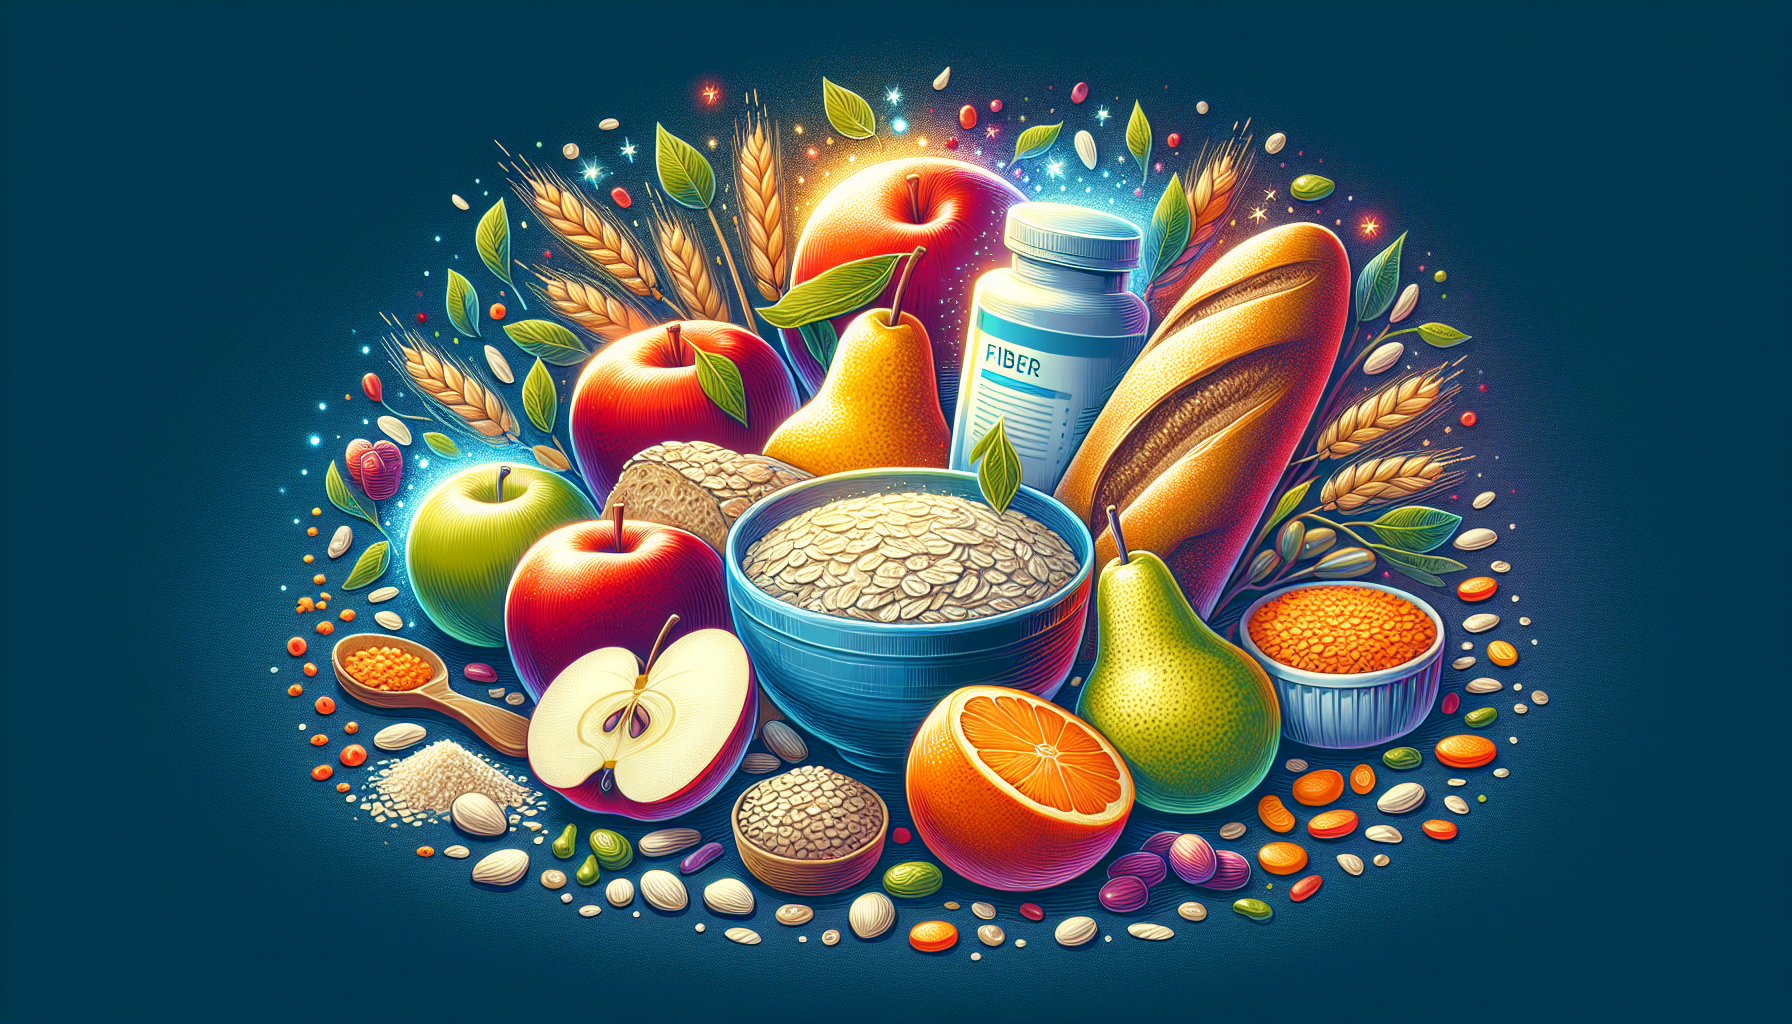 Fiber supplements and their benefits